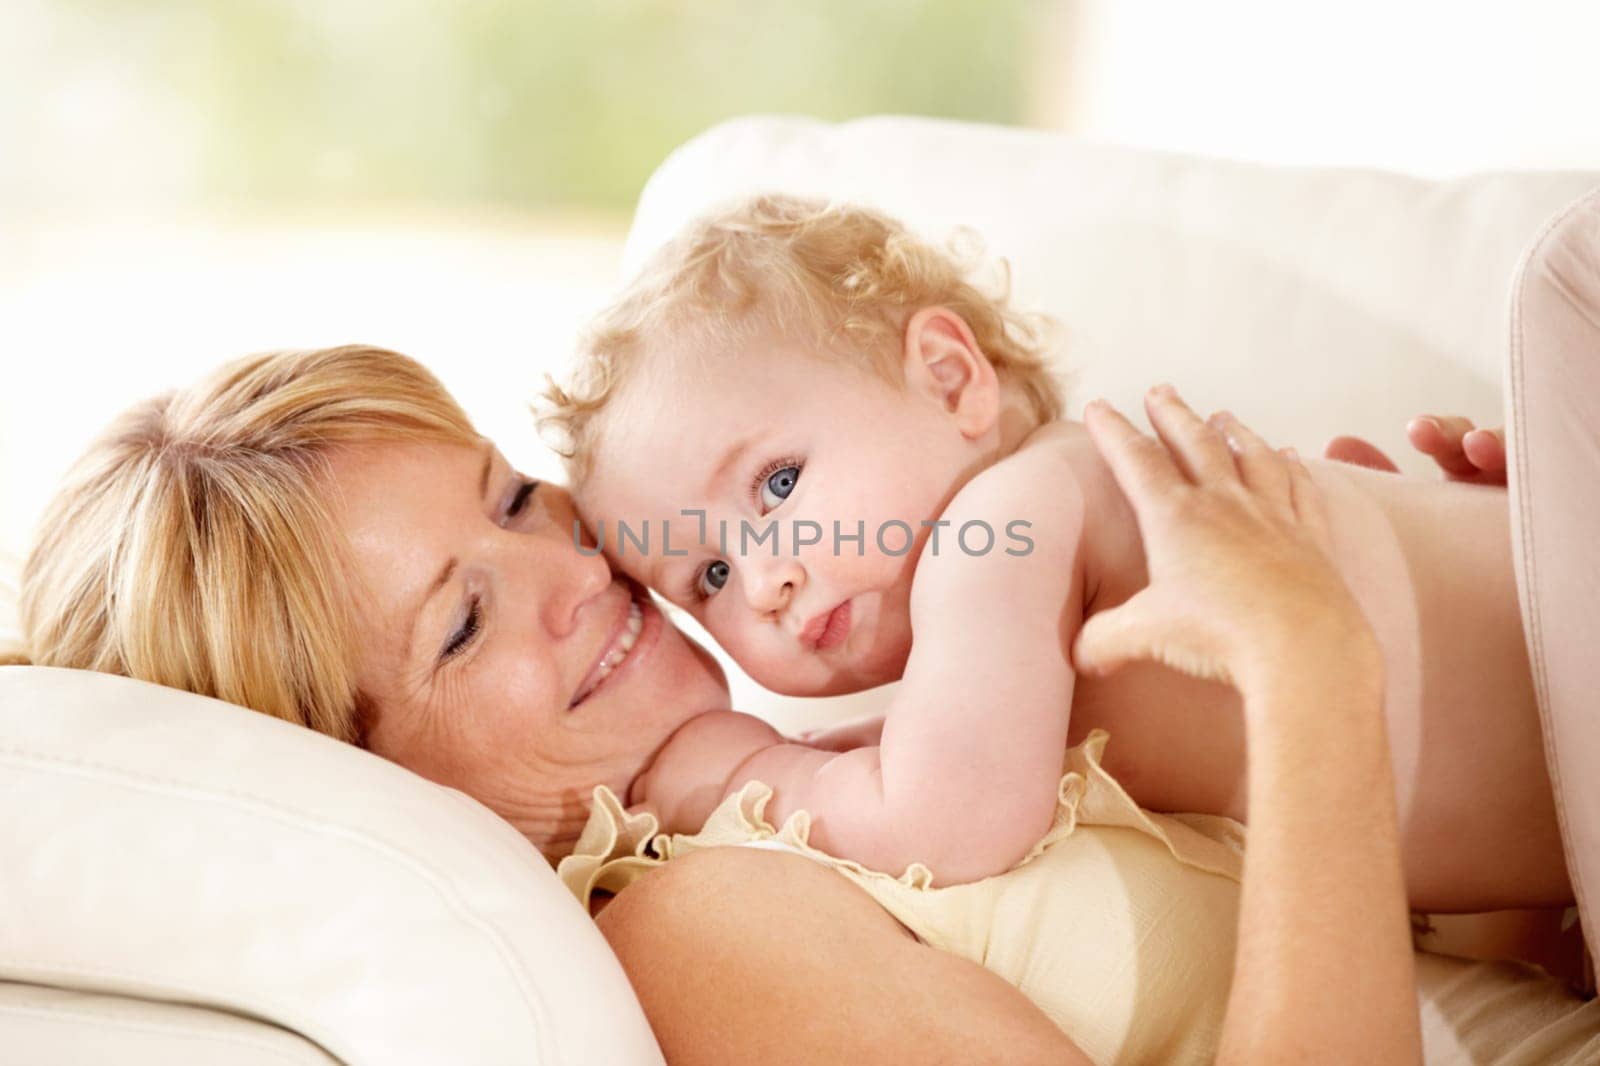 Baby, mother or holding for love on couch, care support or health wellness with parent happiness. Woman, young child or together with blonde hair, natural bonding or calm relax for growth development.